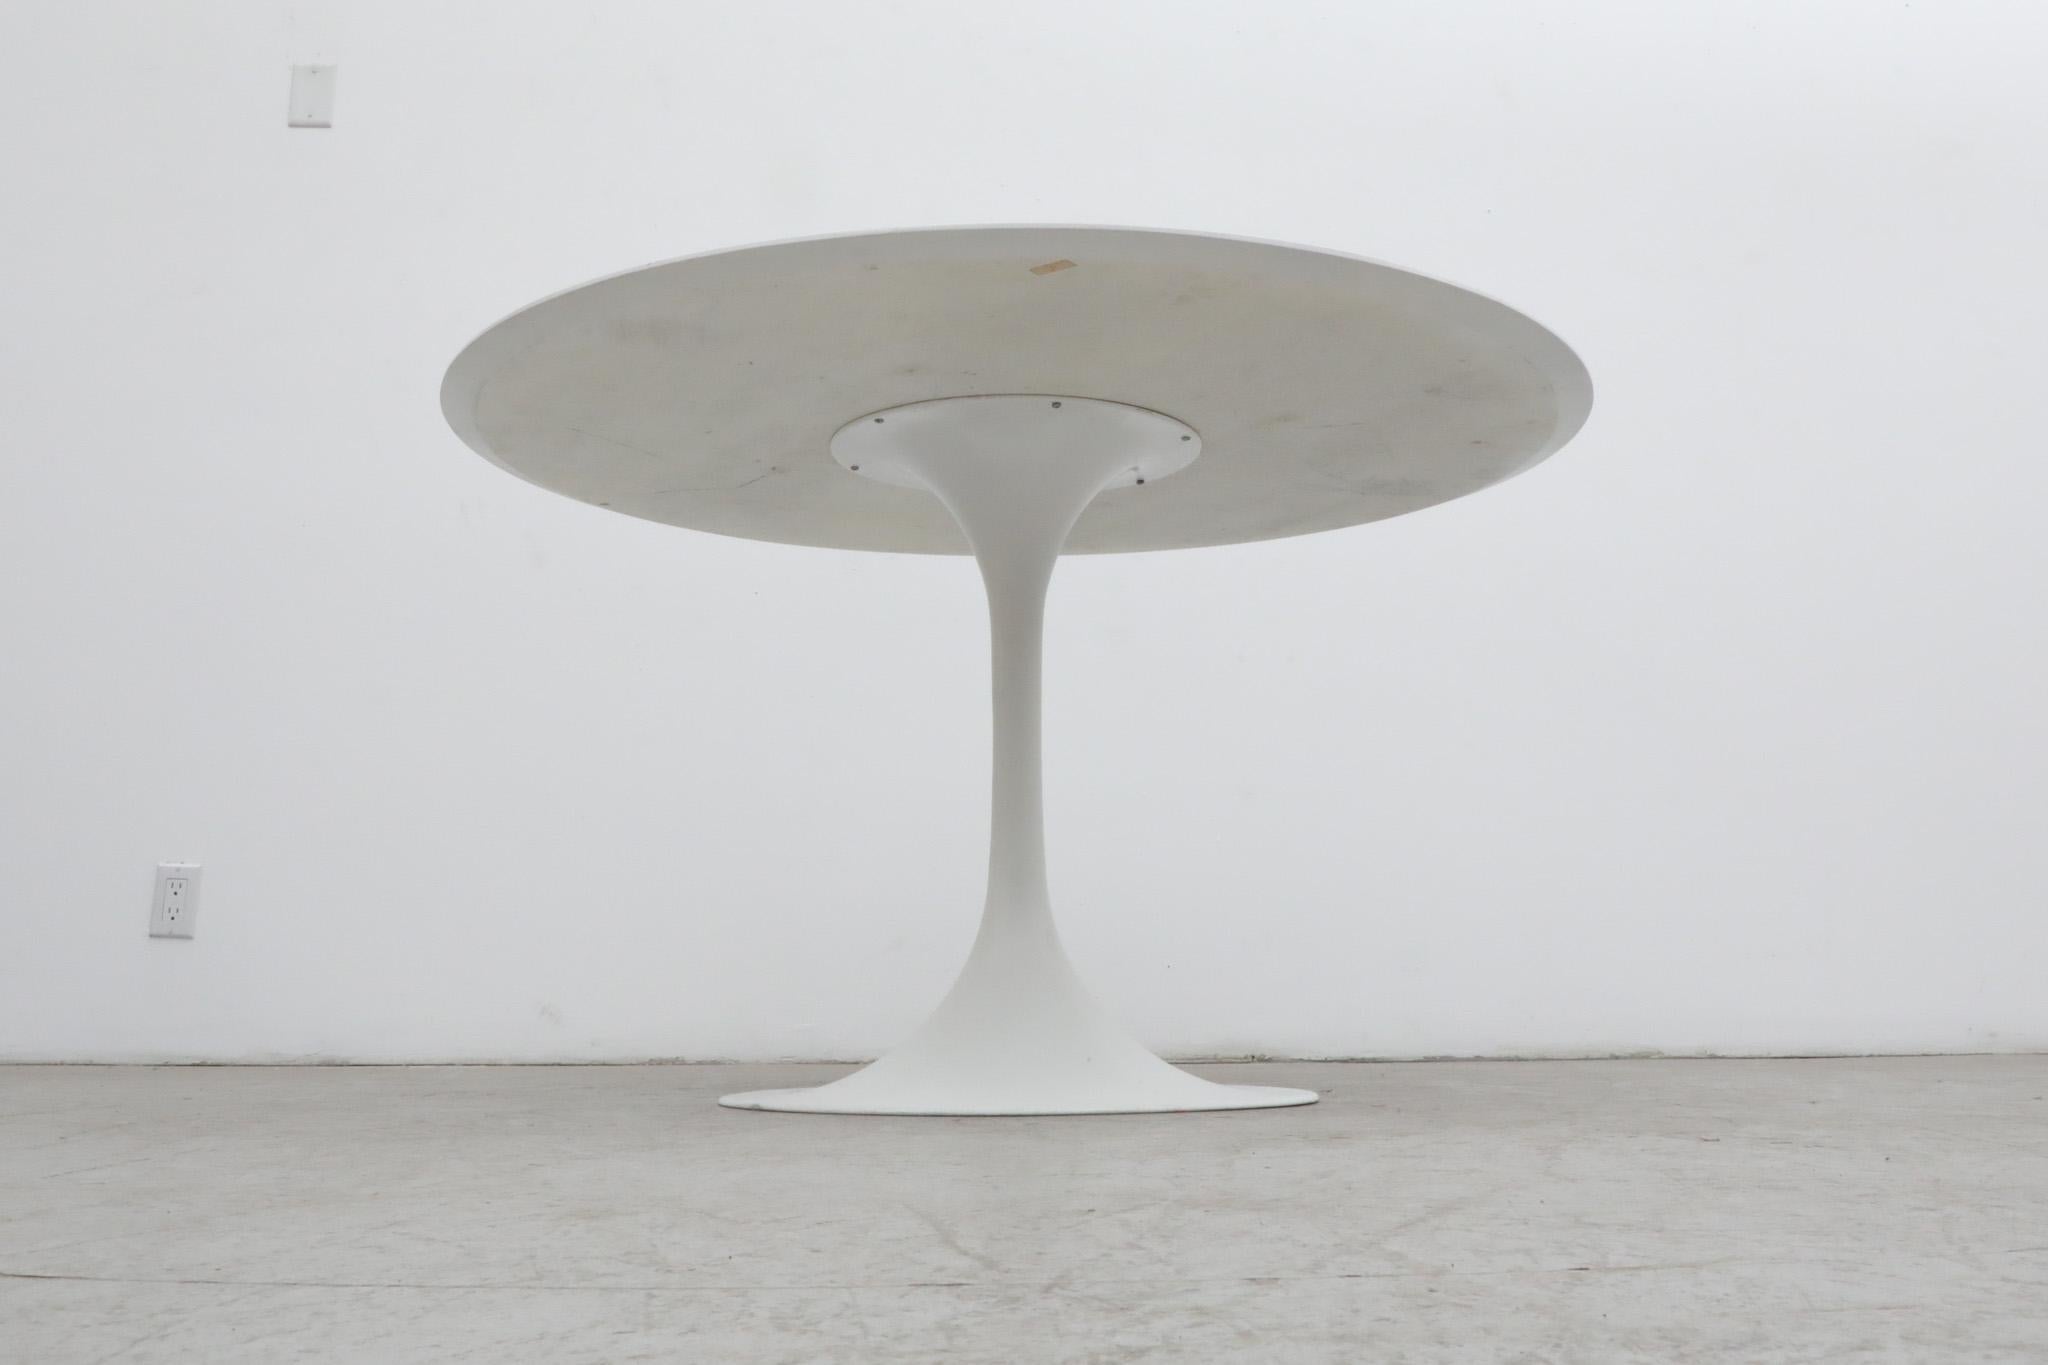 Classic Mid-Century Eero Saarinen Style Tulip Dining Table by Cees Braakman In Good Condition For Sale In Los Angeles, CA